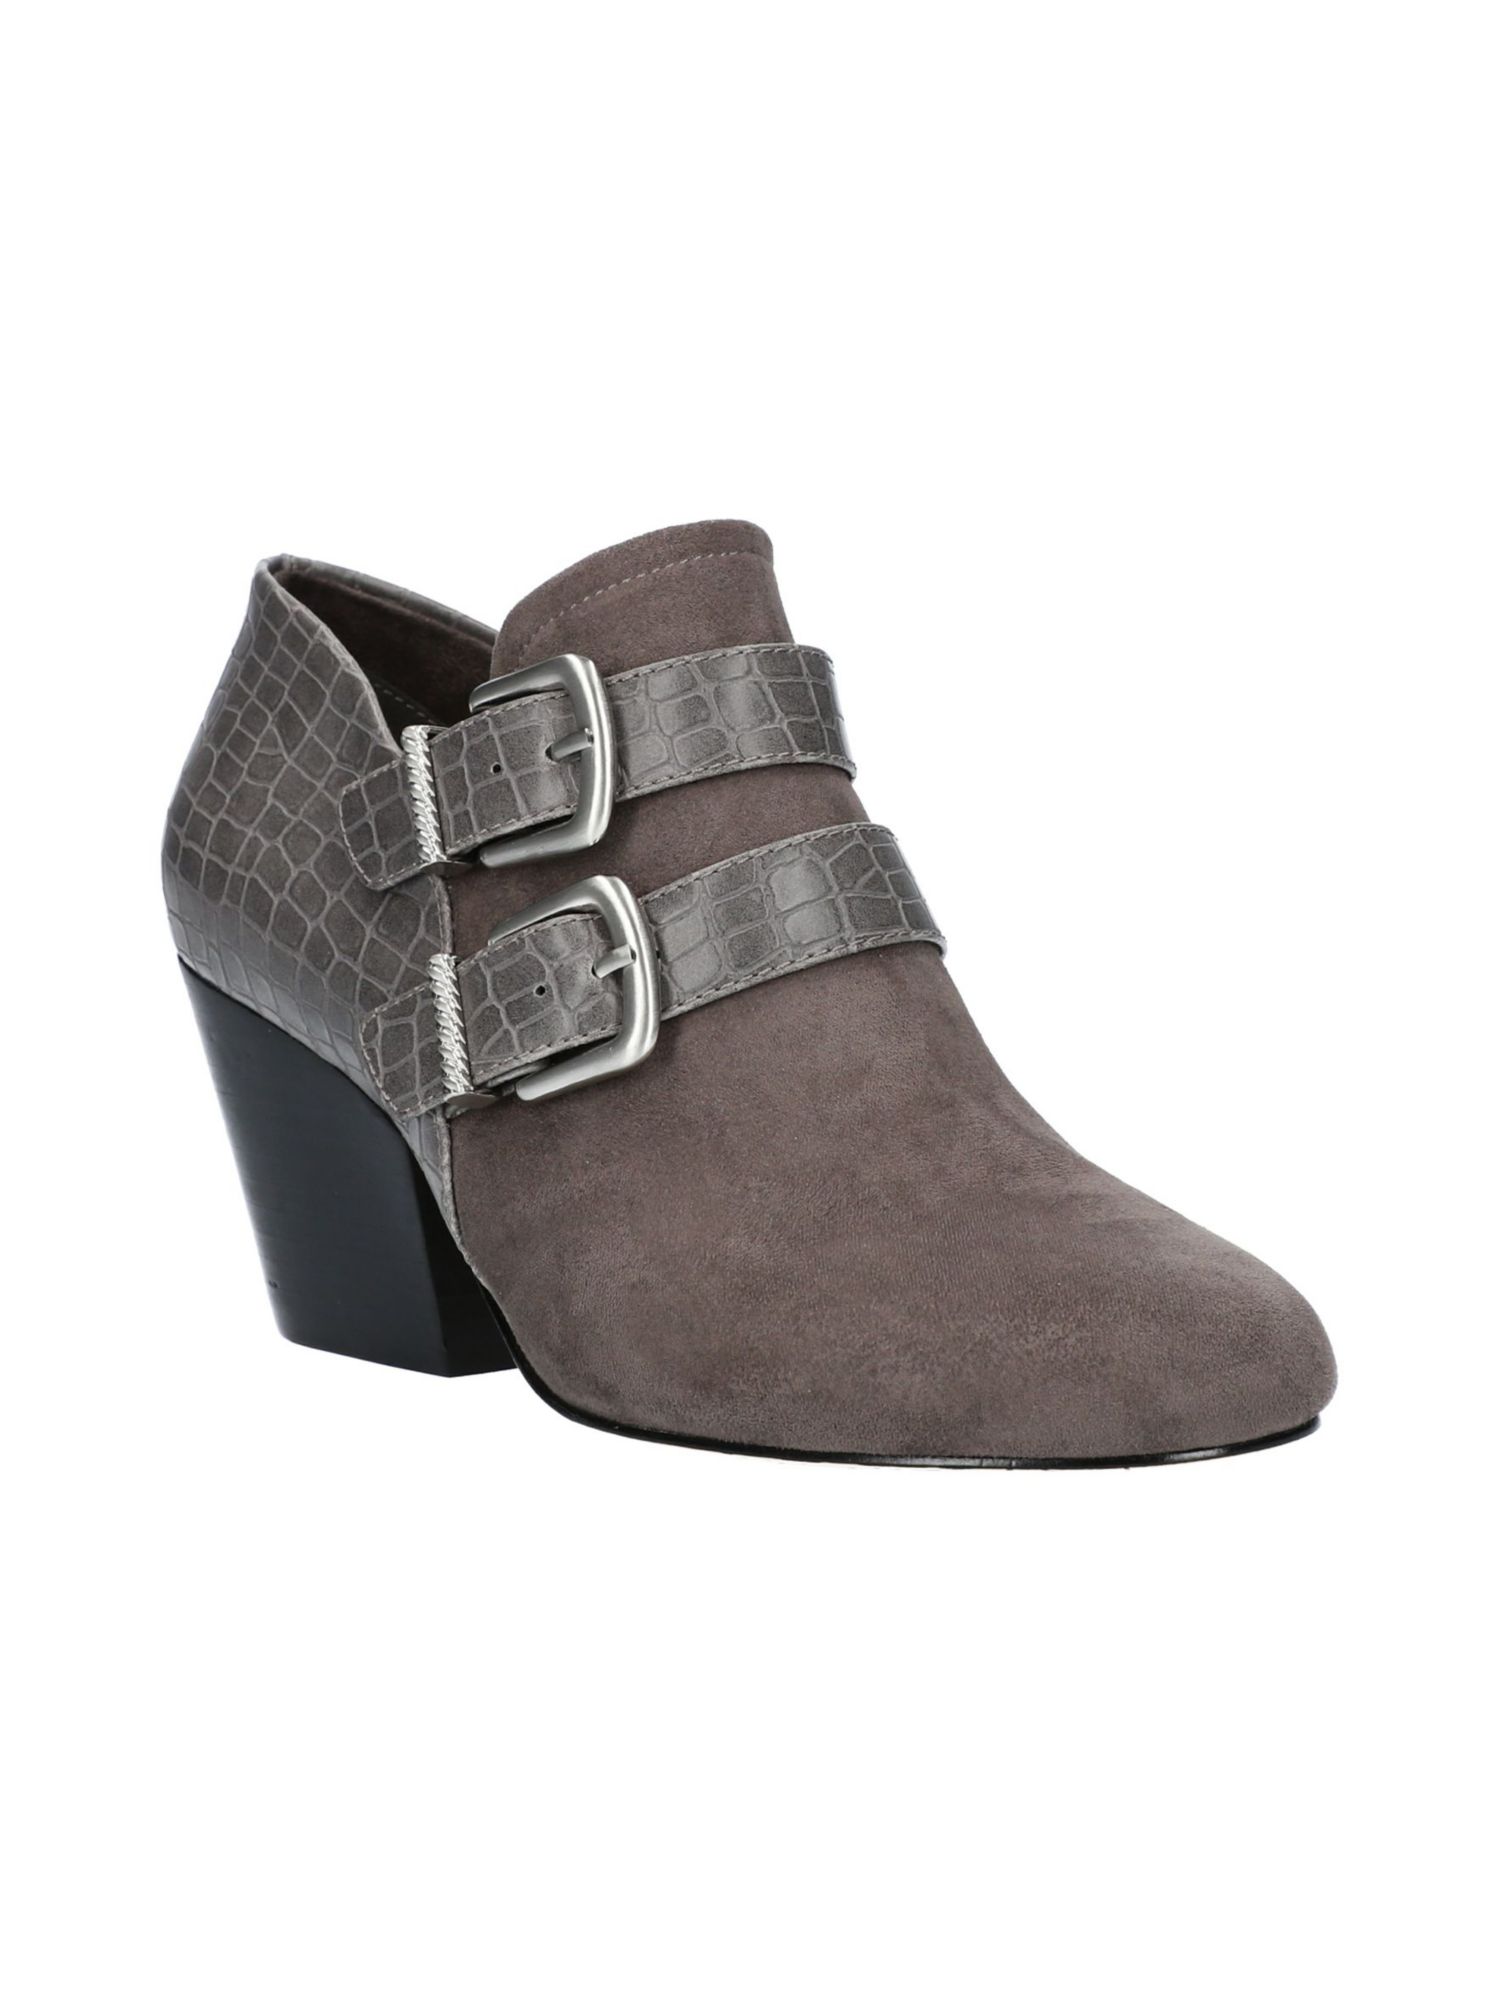 BELLA VITA Womens Gray Snake Skin Pattern Strap Accents Buckle Accent Padded Thea Round Toe Block Heel Zip-Up Booties 11 N